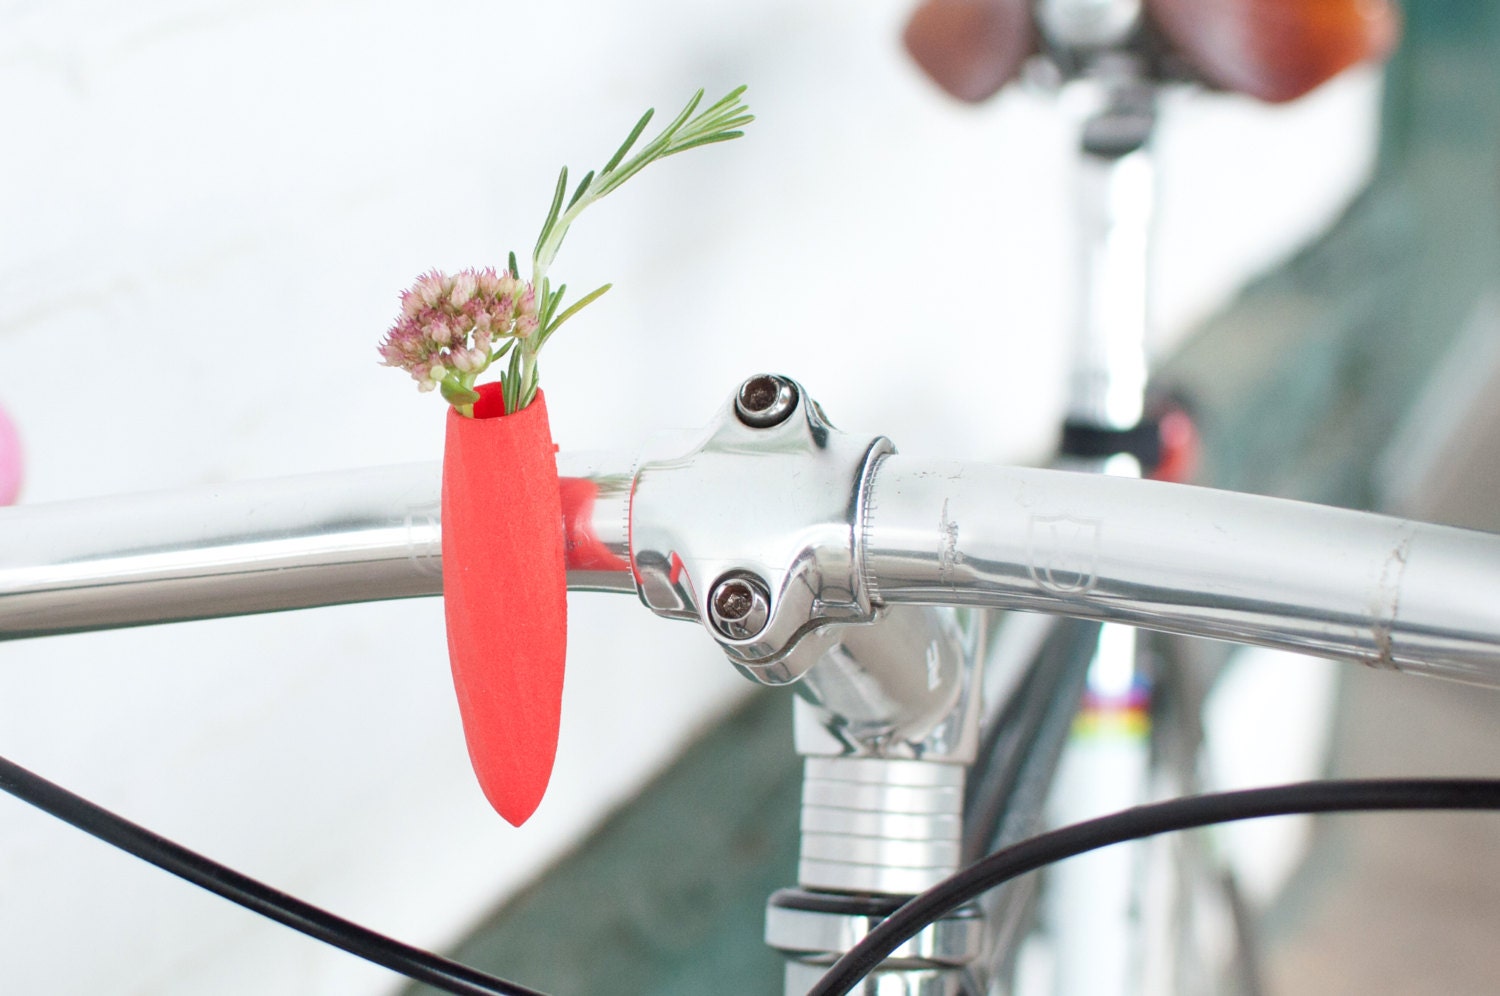 Twisted Handlebar Vase in Coral For Your Bike